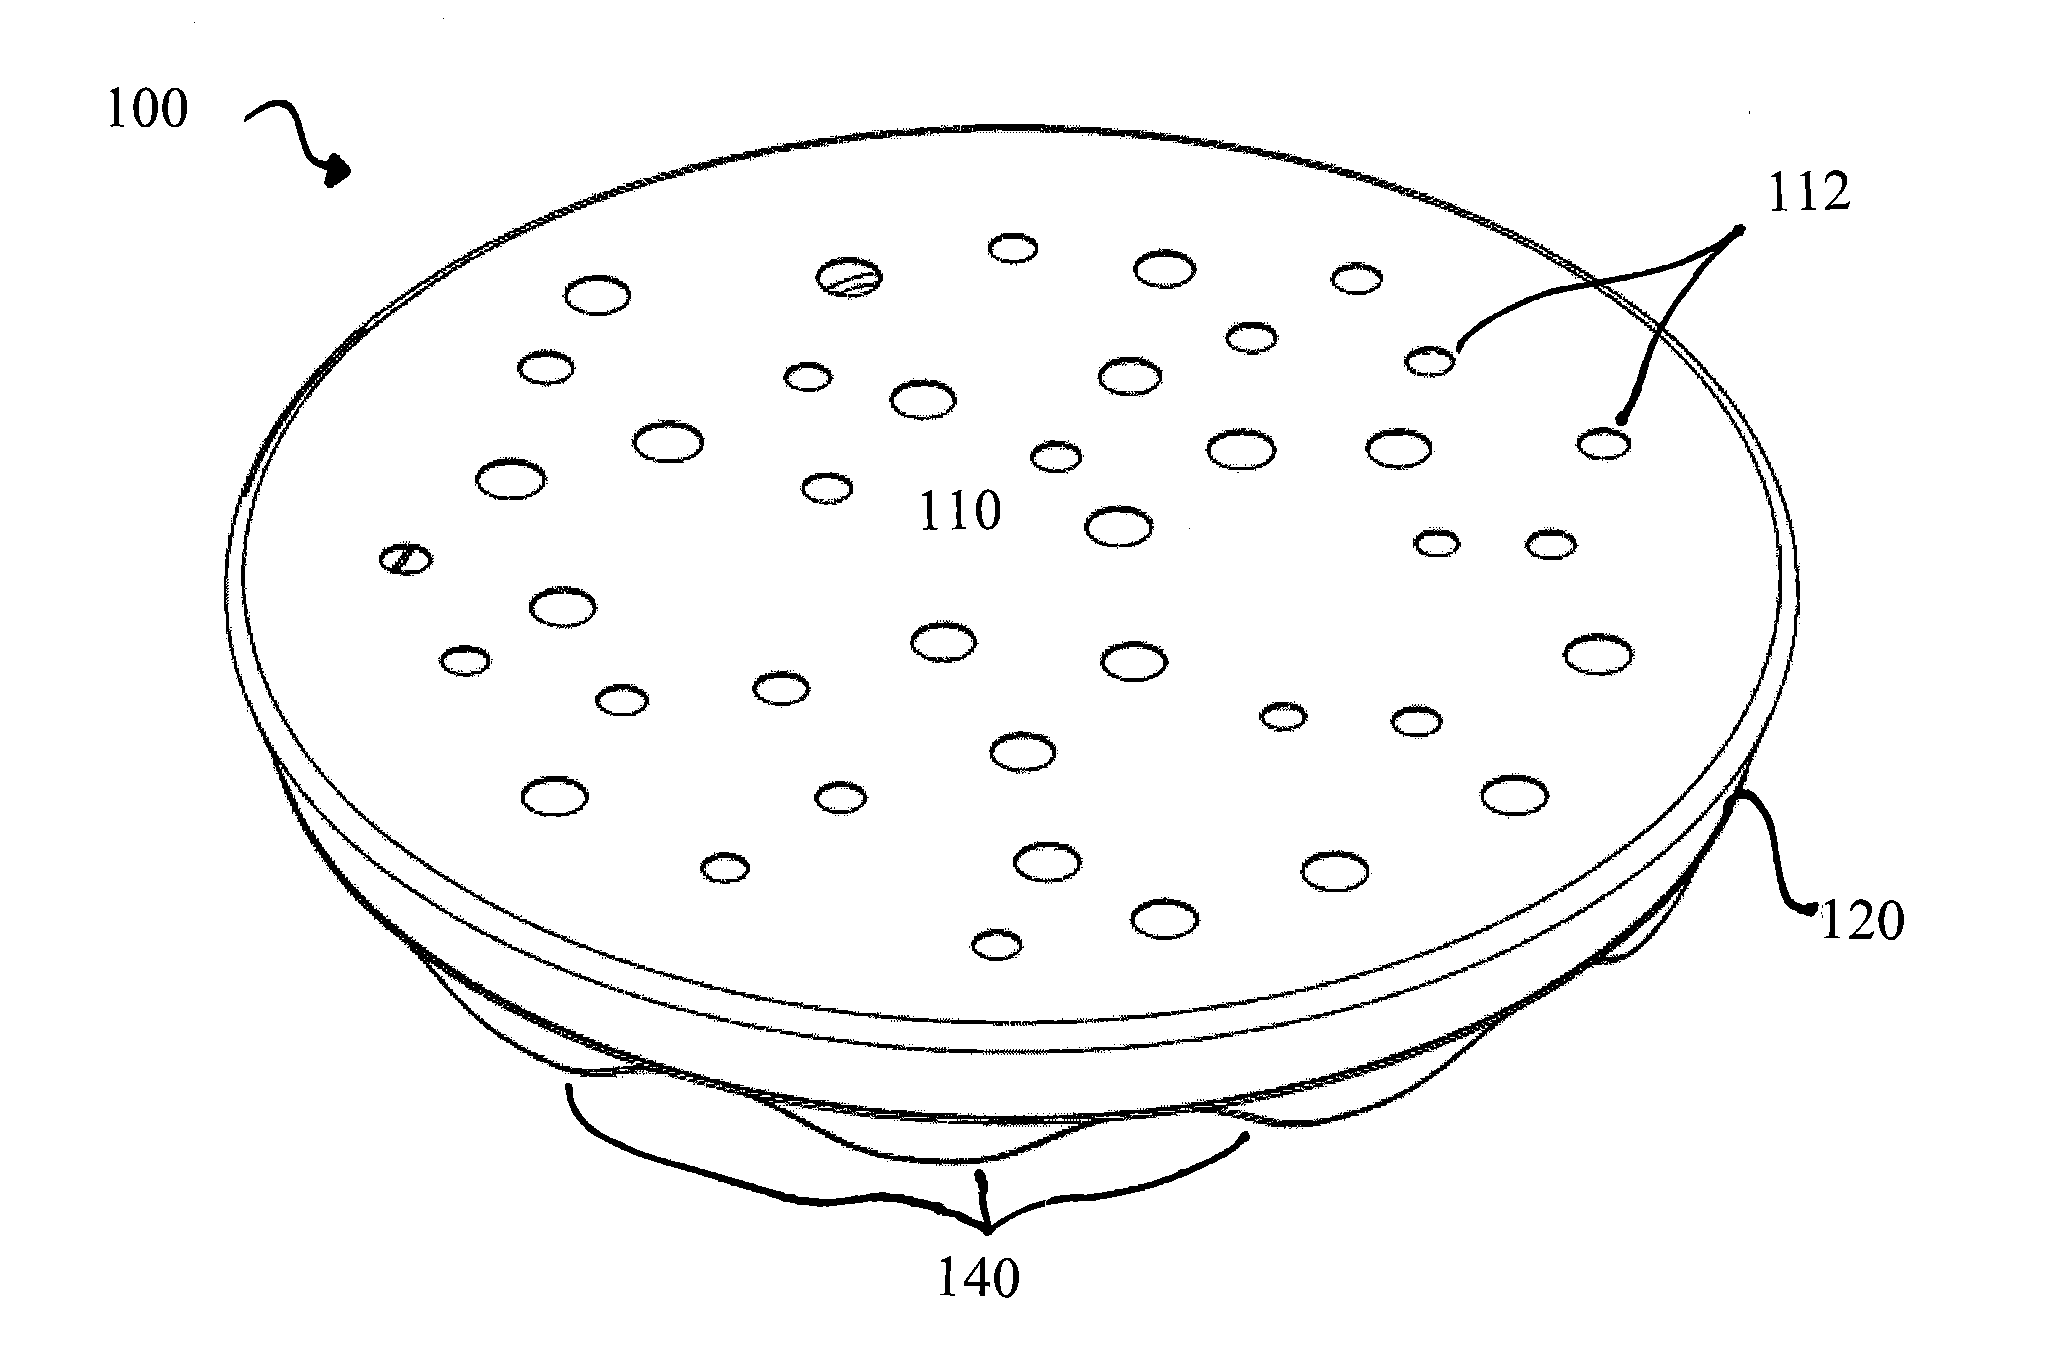 Microwavable cooking implements and methods for crisping food items using the same